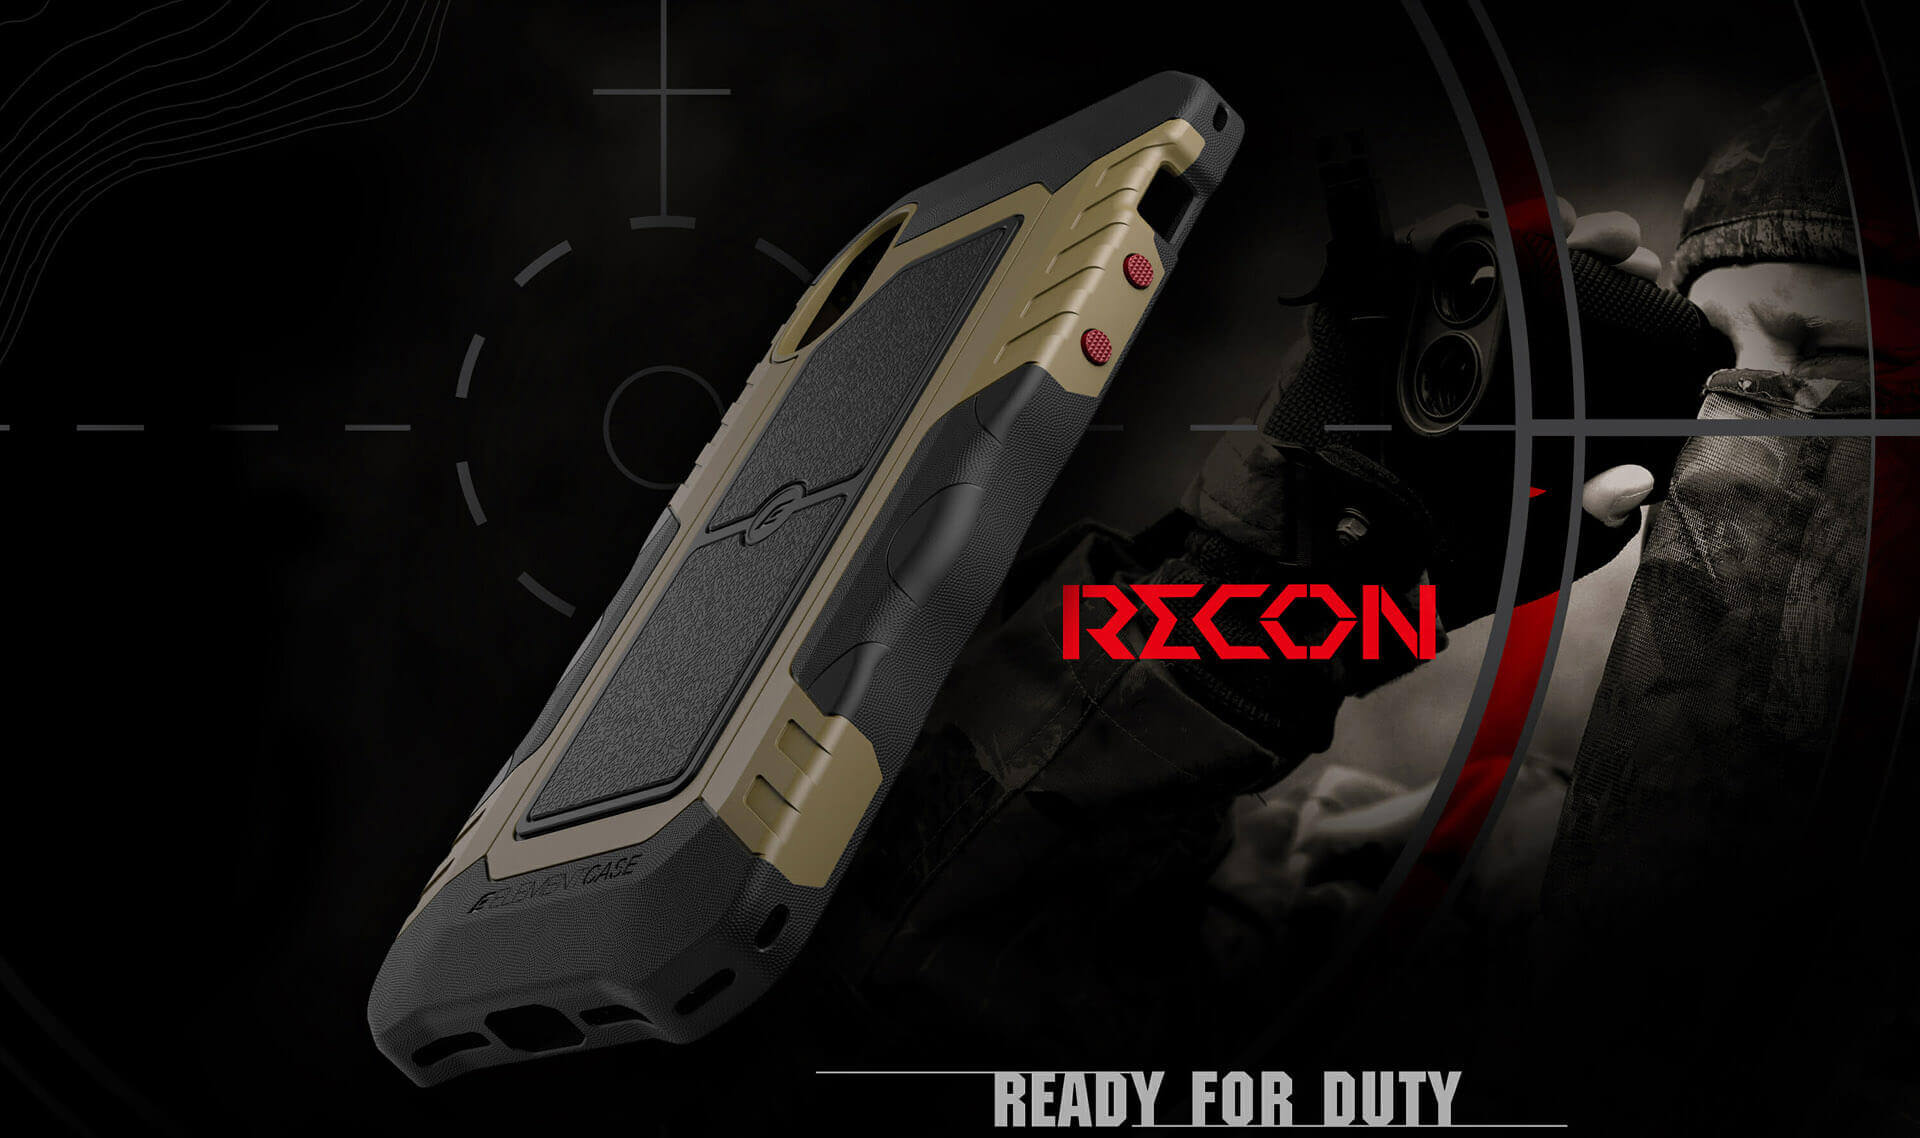 Recon – Ready for Duty